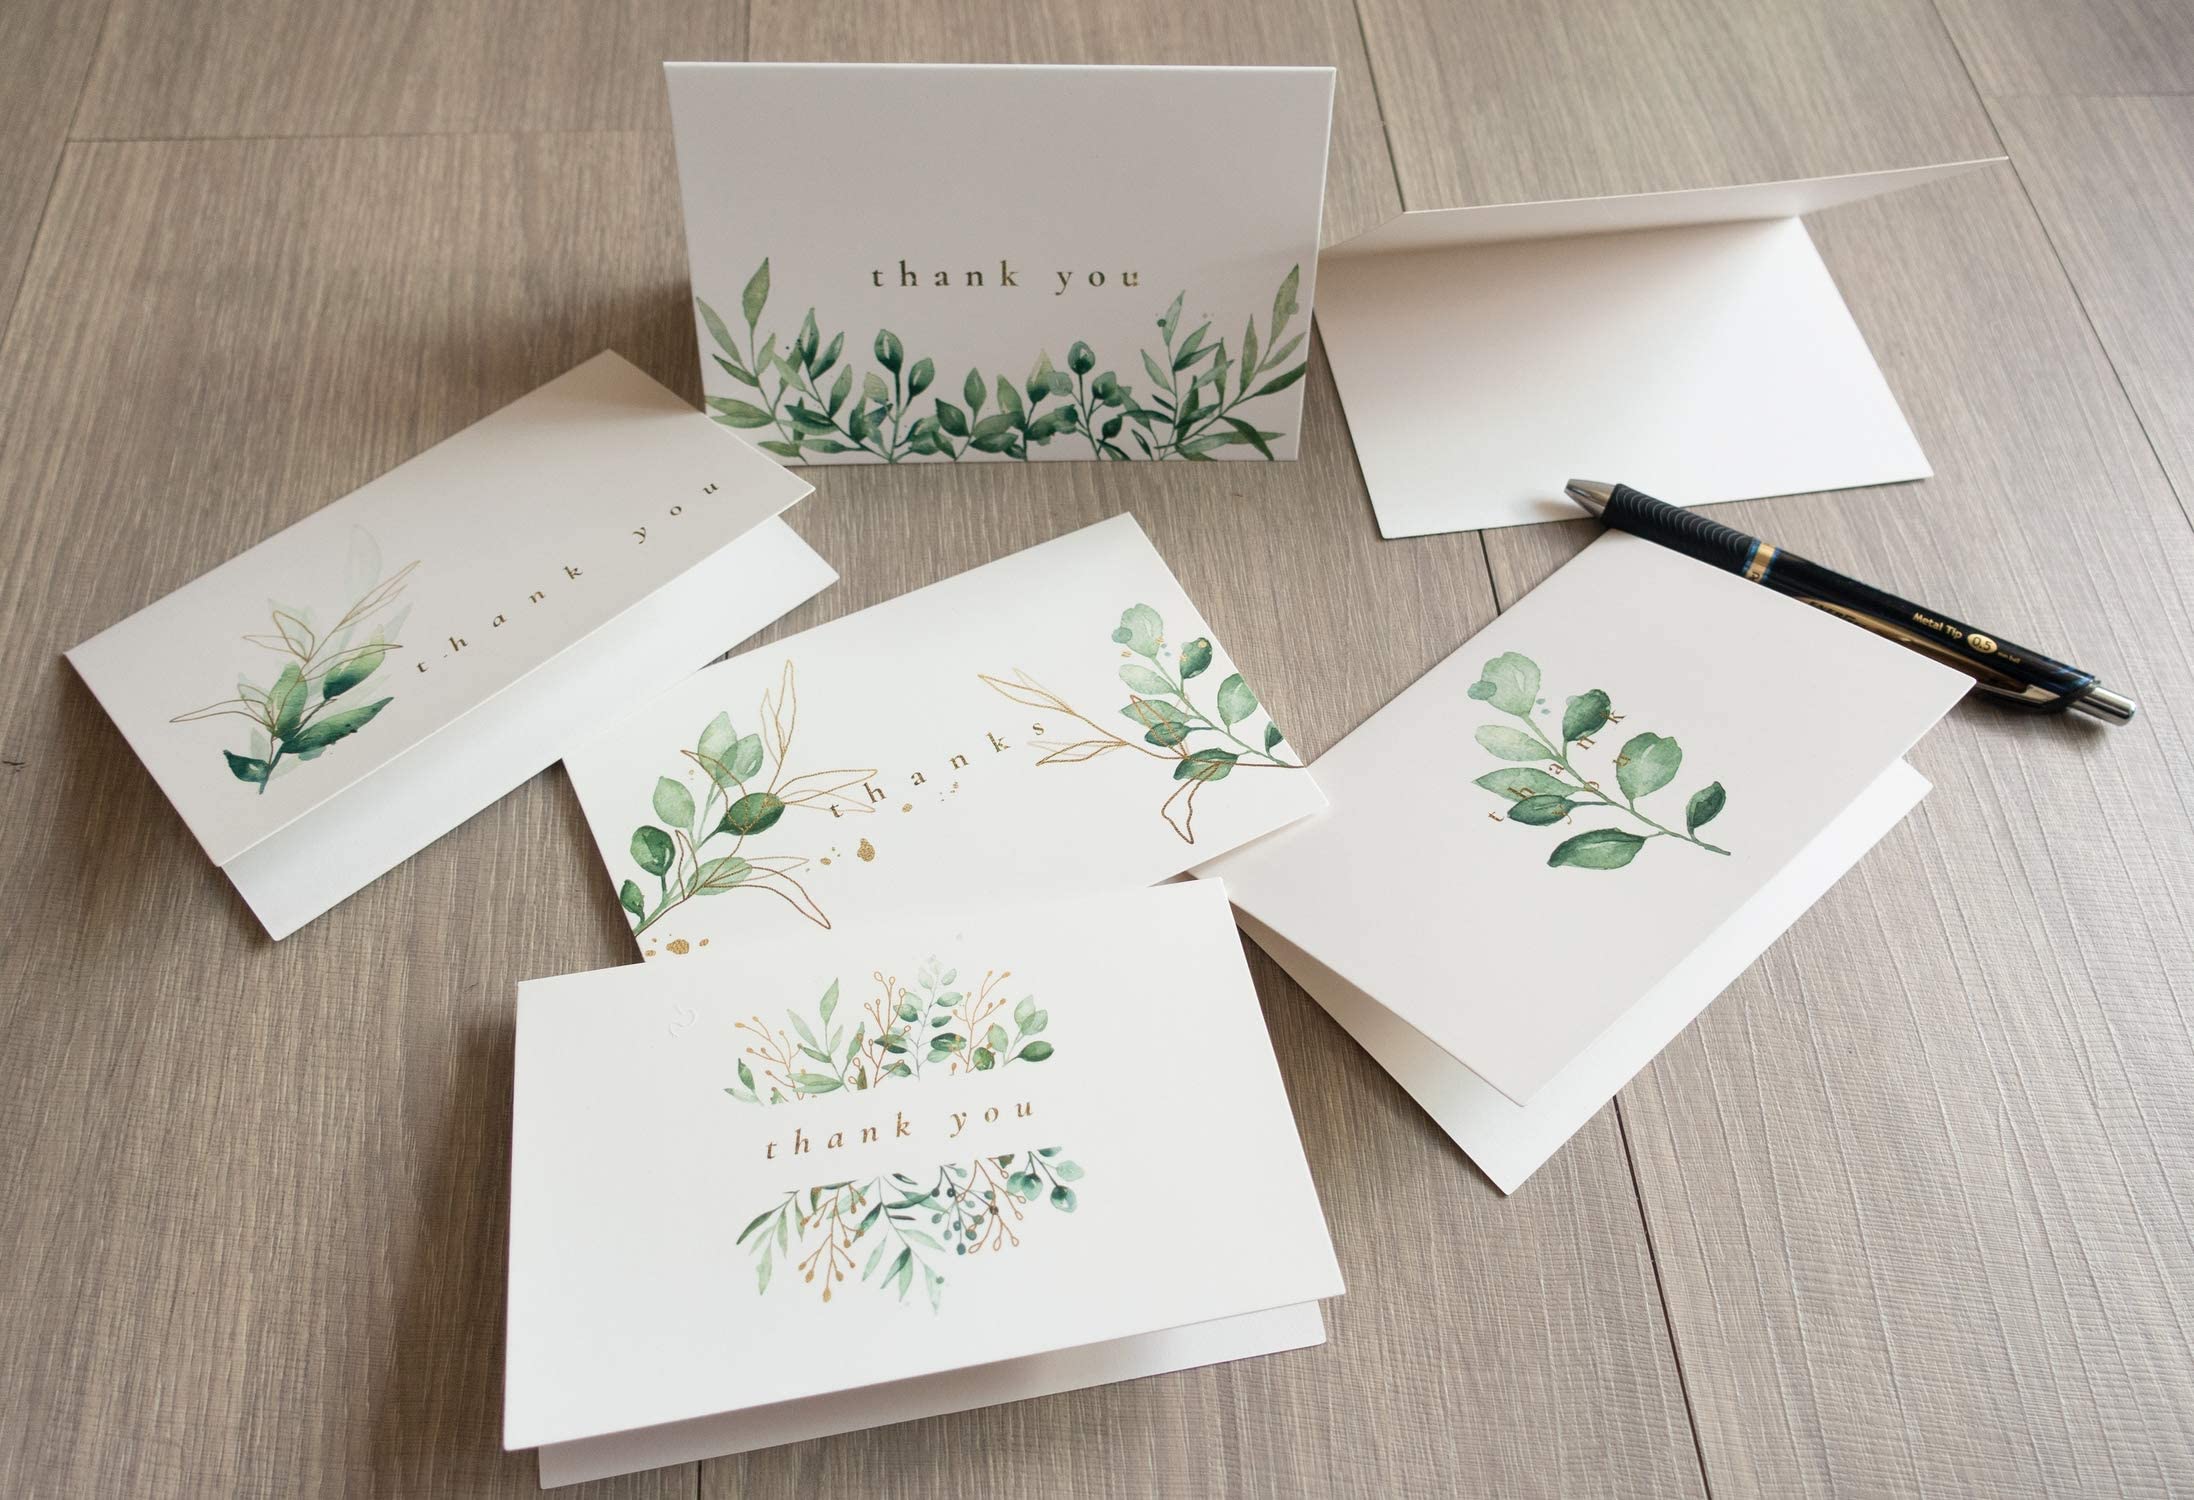 Gooji 4x6 Golden Greenery Thank You Cards with Envelopes (Bulk 36-Pack), Matching Peel-and-Seal Envelopes | Wedding Thank You Cards, Bridal Shower Thank You Cards, Birthday Party, Baby Shower, Blank Notes Small Business Box Assorted Stationary Personalize